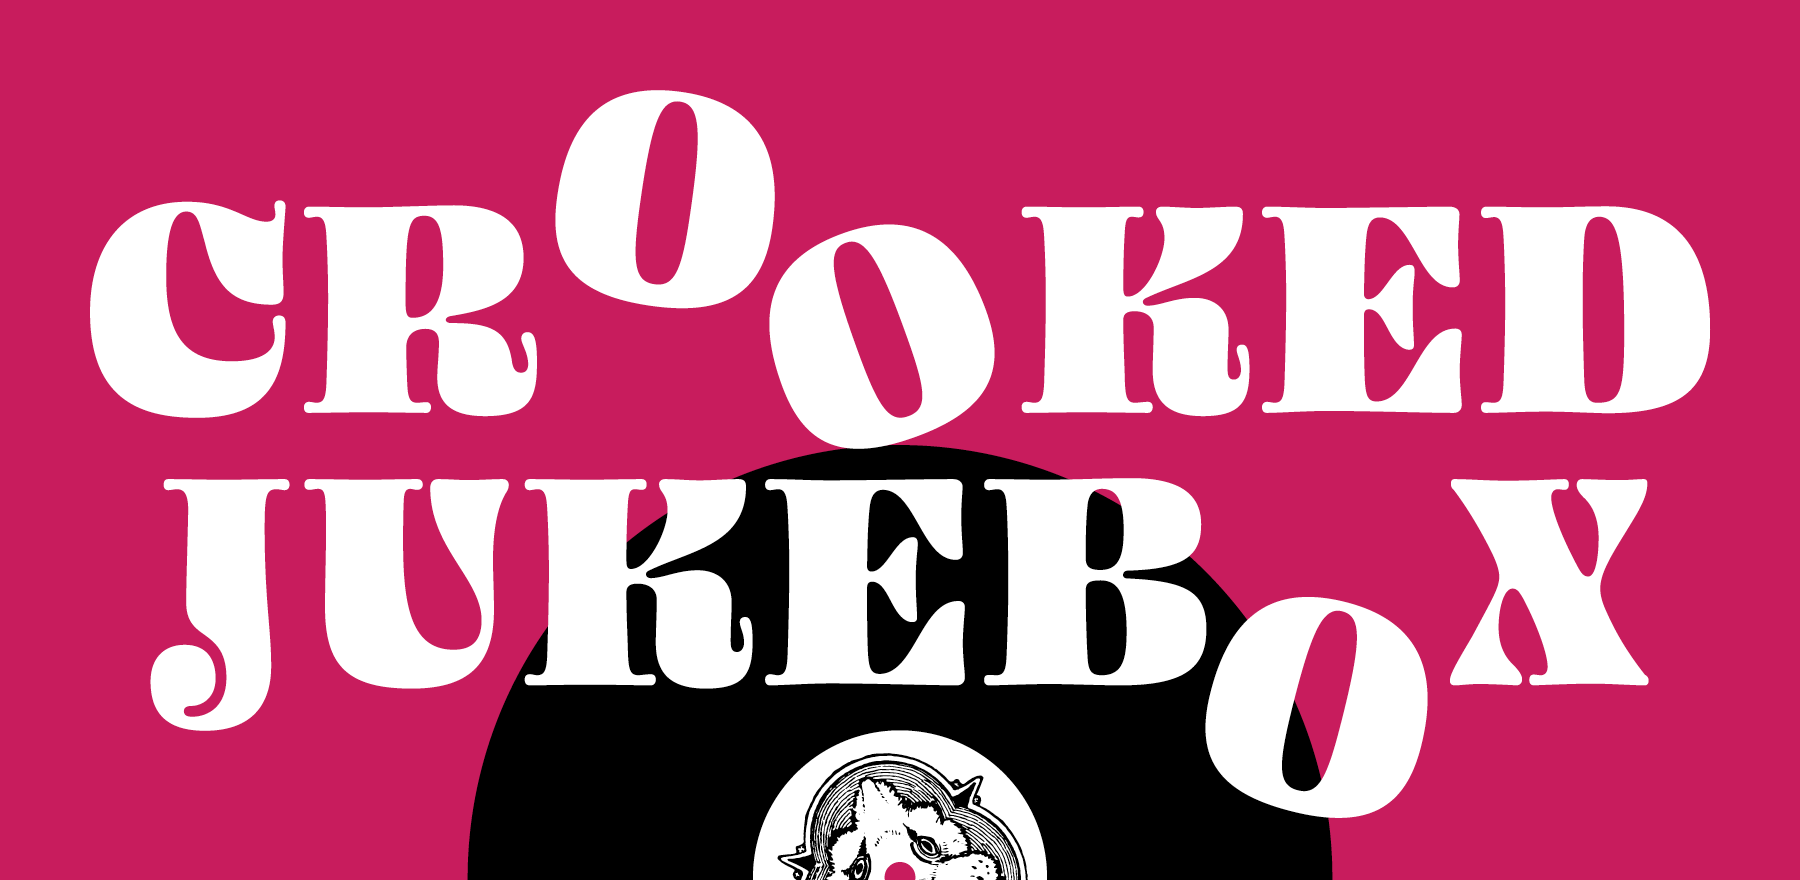 Introducing: CROOKED JUKEBOX - Featured image